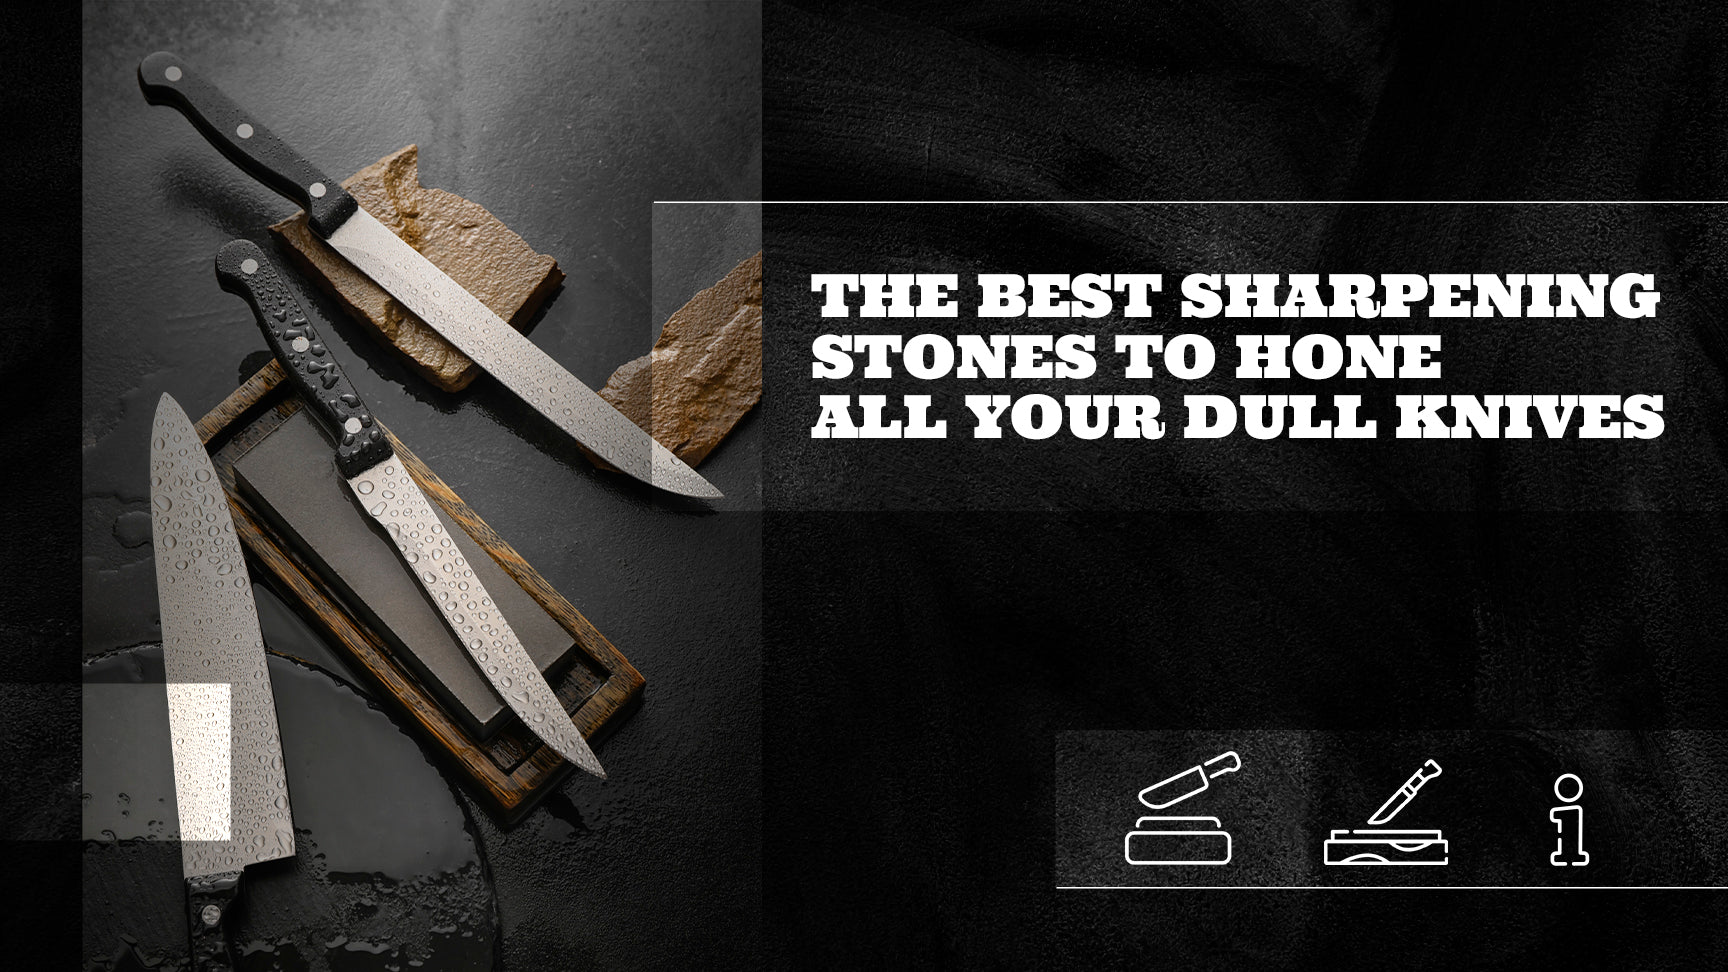 The Best Sharpening Stones to Hone All Your Dull Knives – The